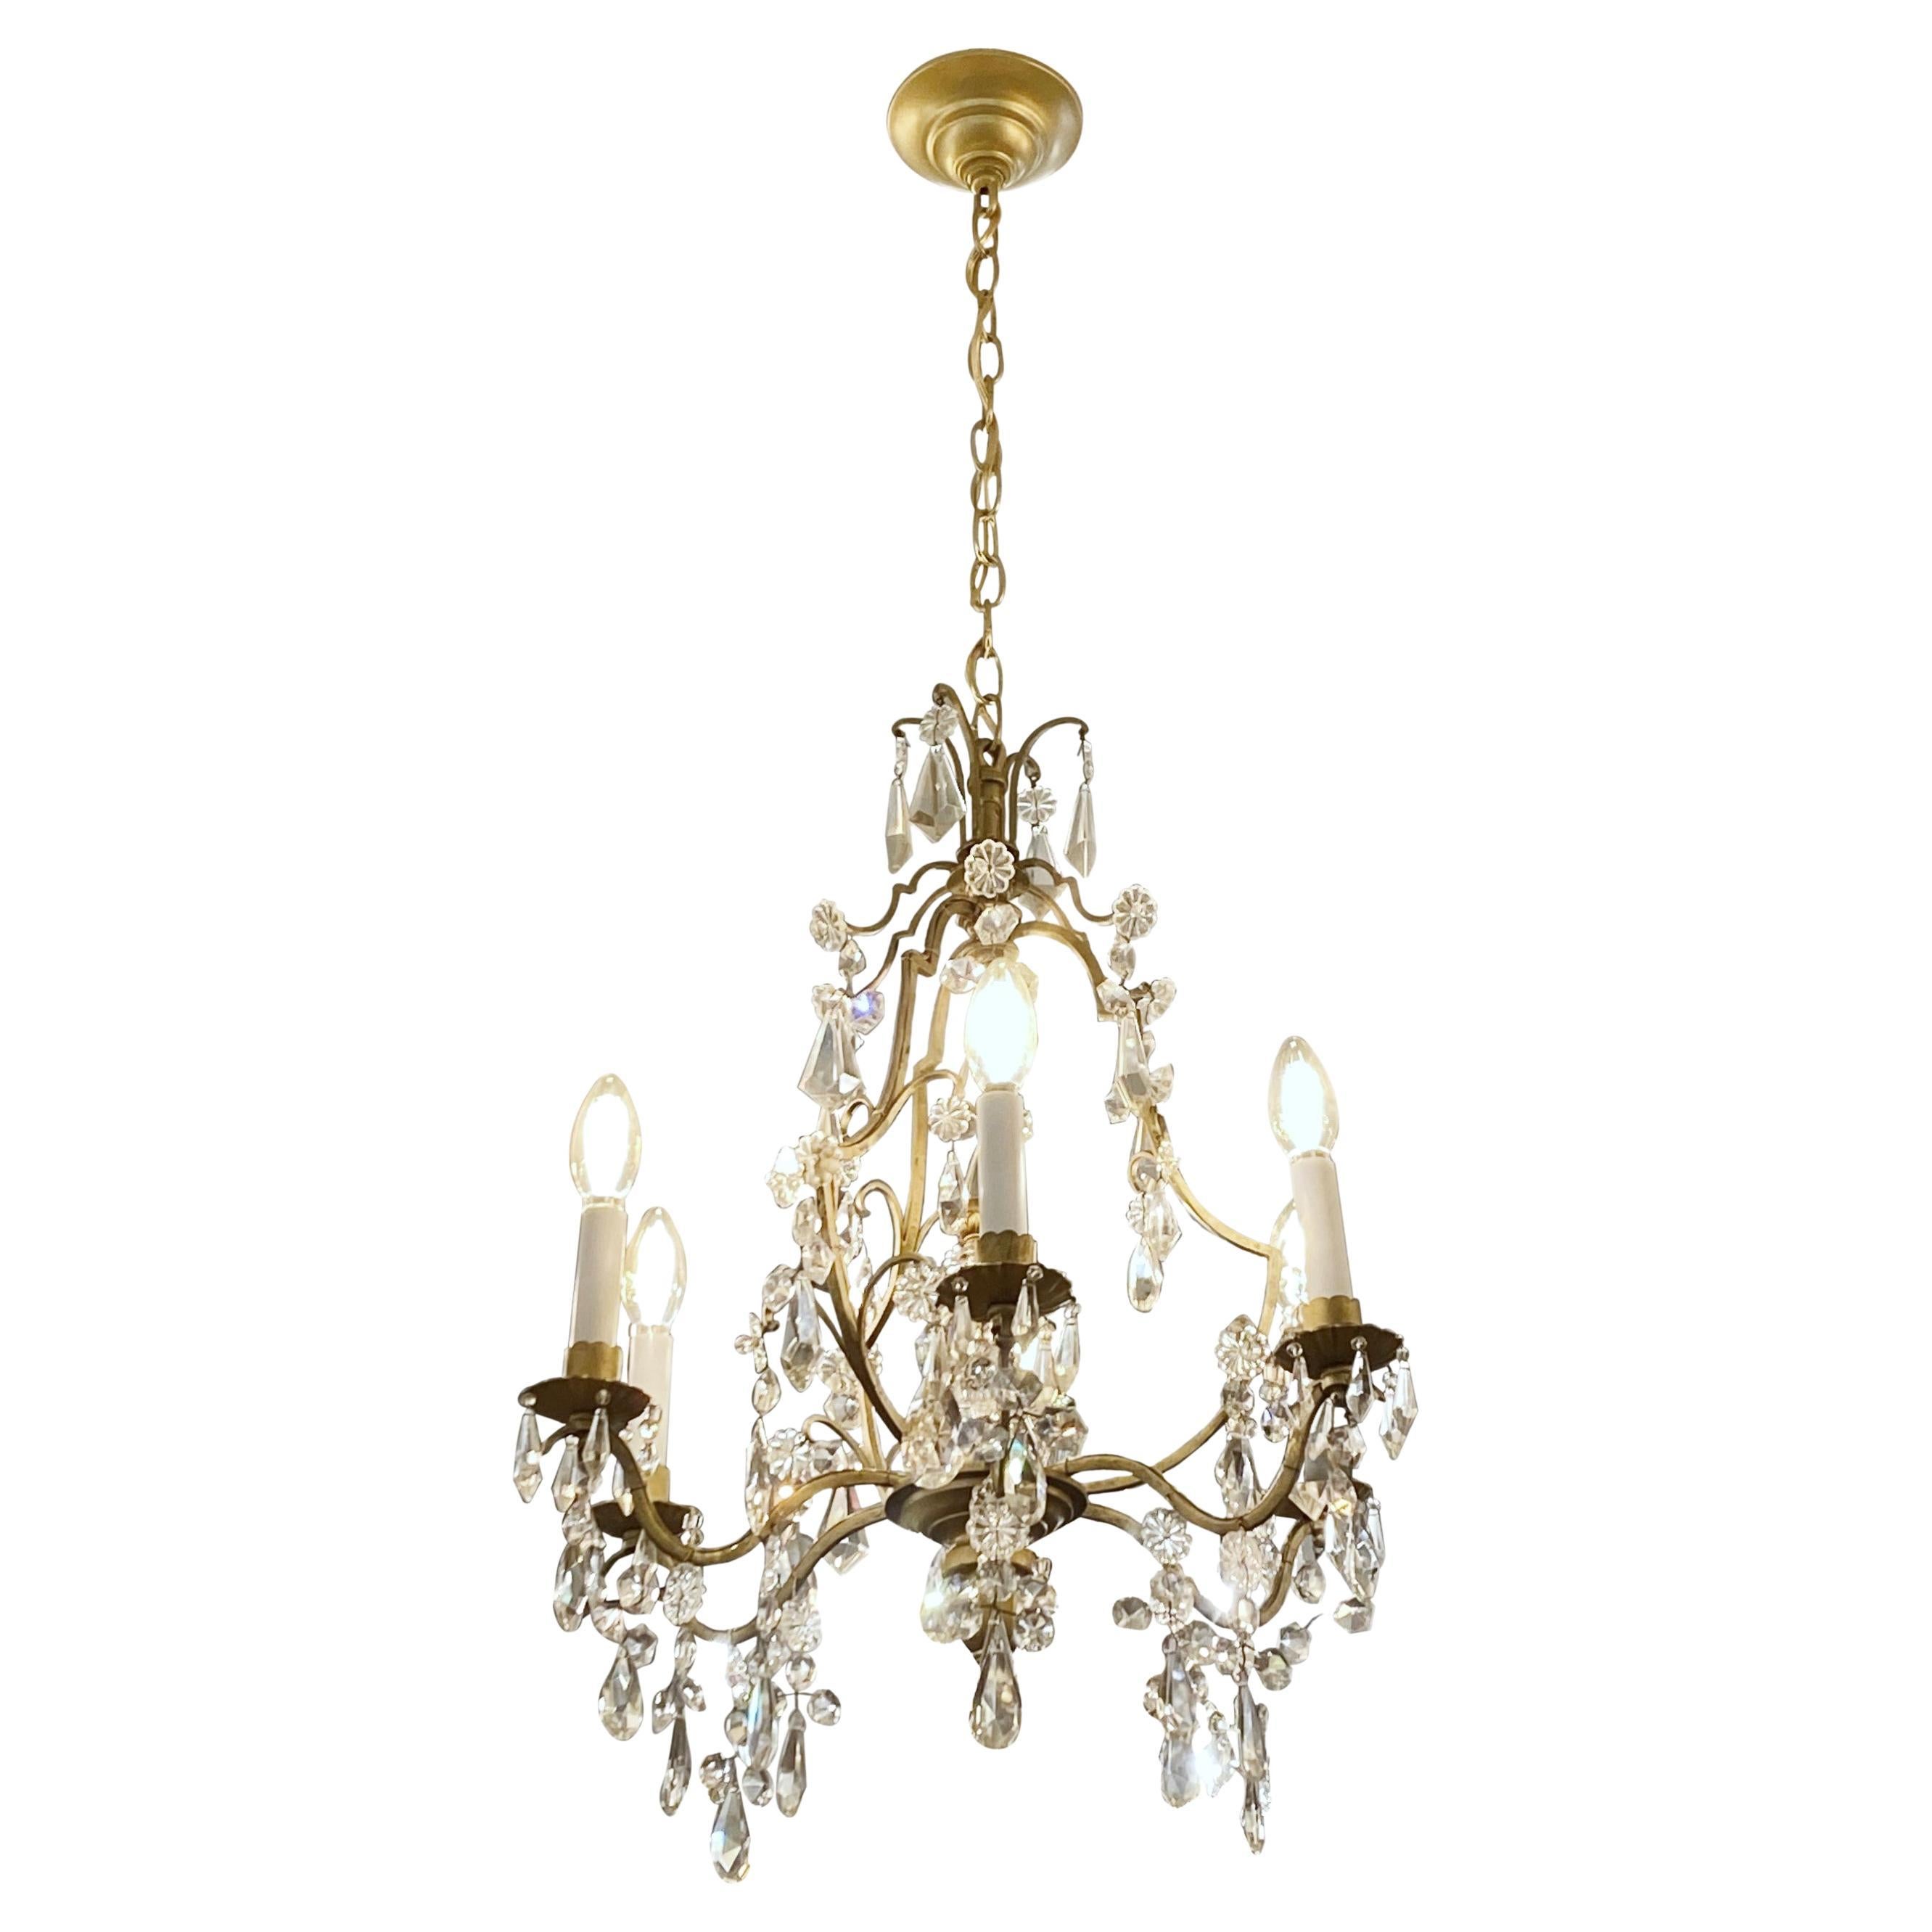 Small French Louis XV Crystal Chandelier 6 Candelabra Lights